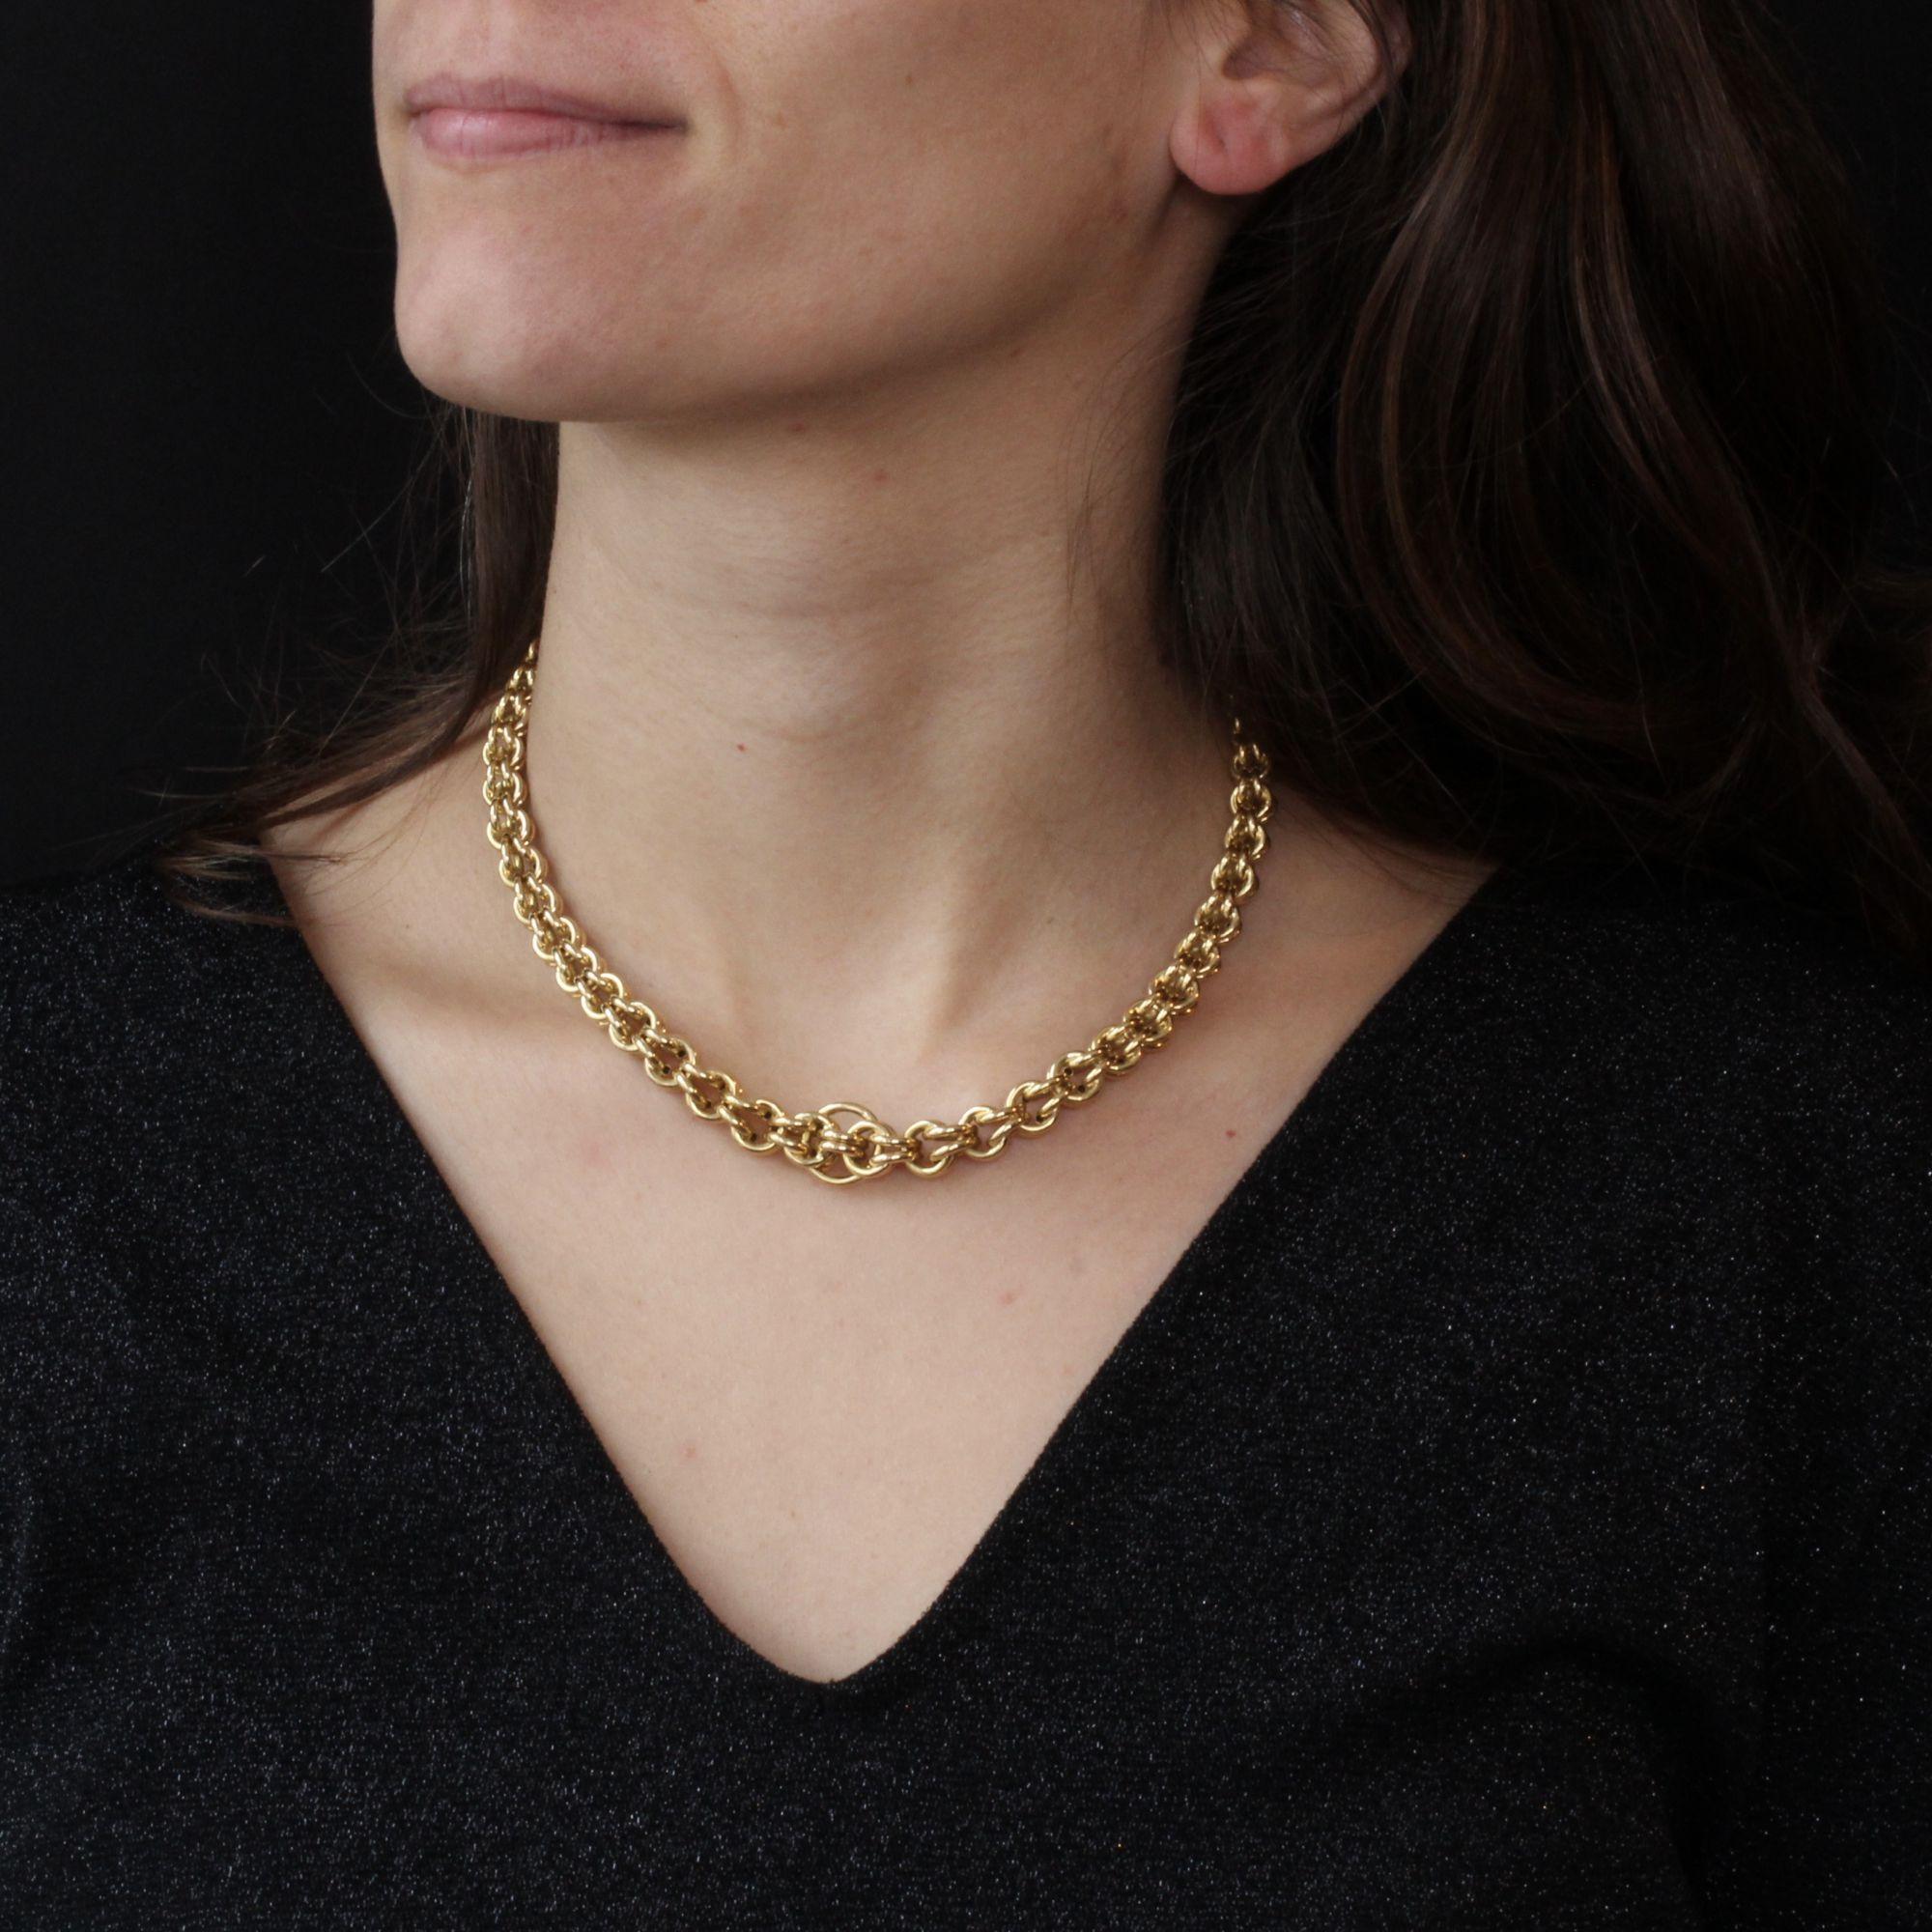 Necklace in 18 karat yellow gold, eagle head hallmark and rhinoceros head hallmark.
This beautiful retro gold necklace is formed of round rings intertwined in fall. The clasp is a snap hook clasp and the retro gold necklace also has a safety